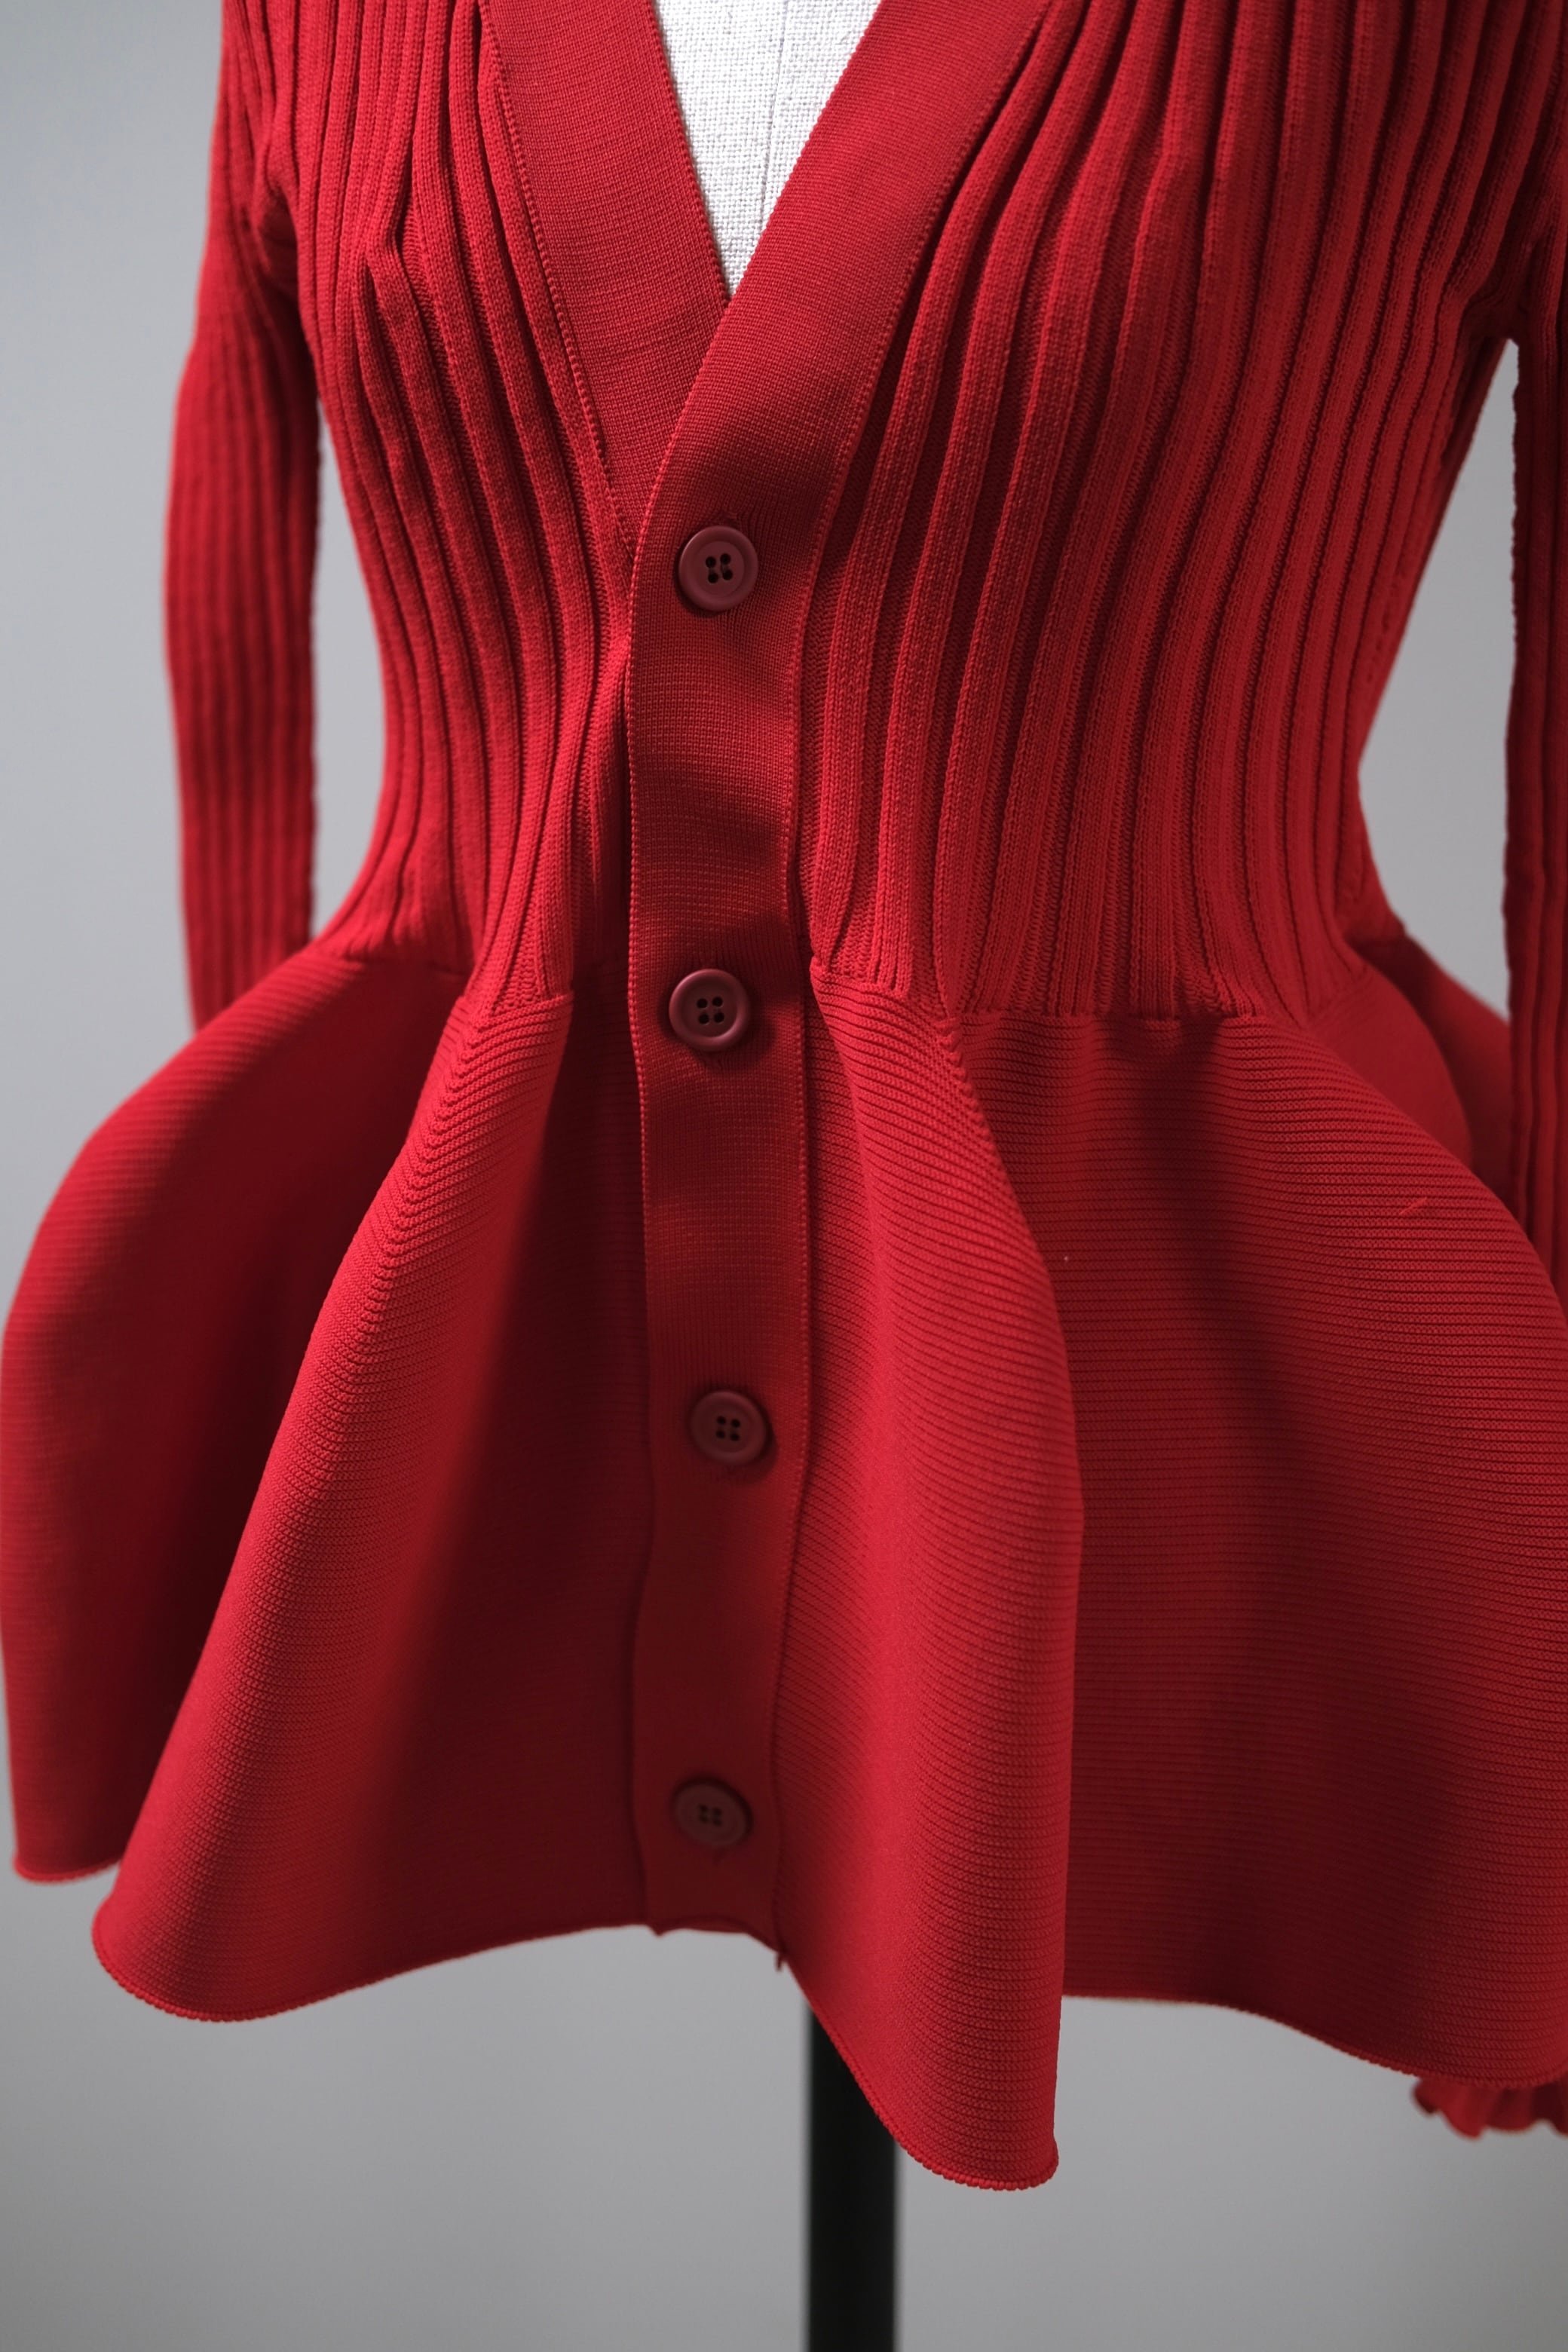 CFCL】POTTERY CARDIGAN 1 - red | loop